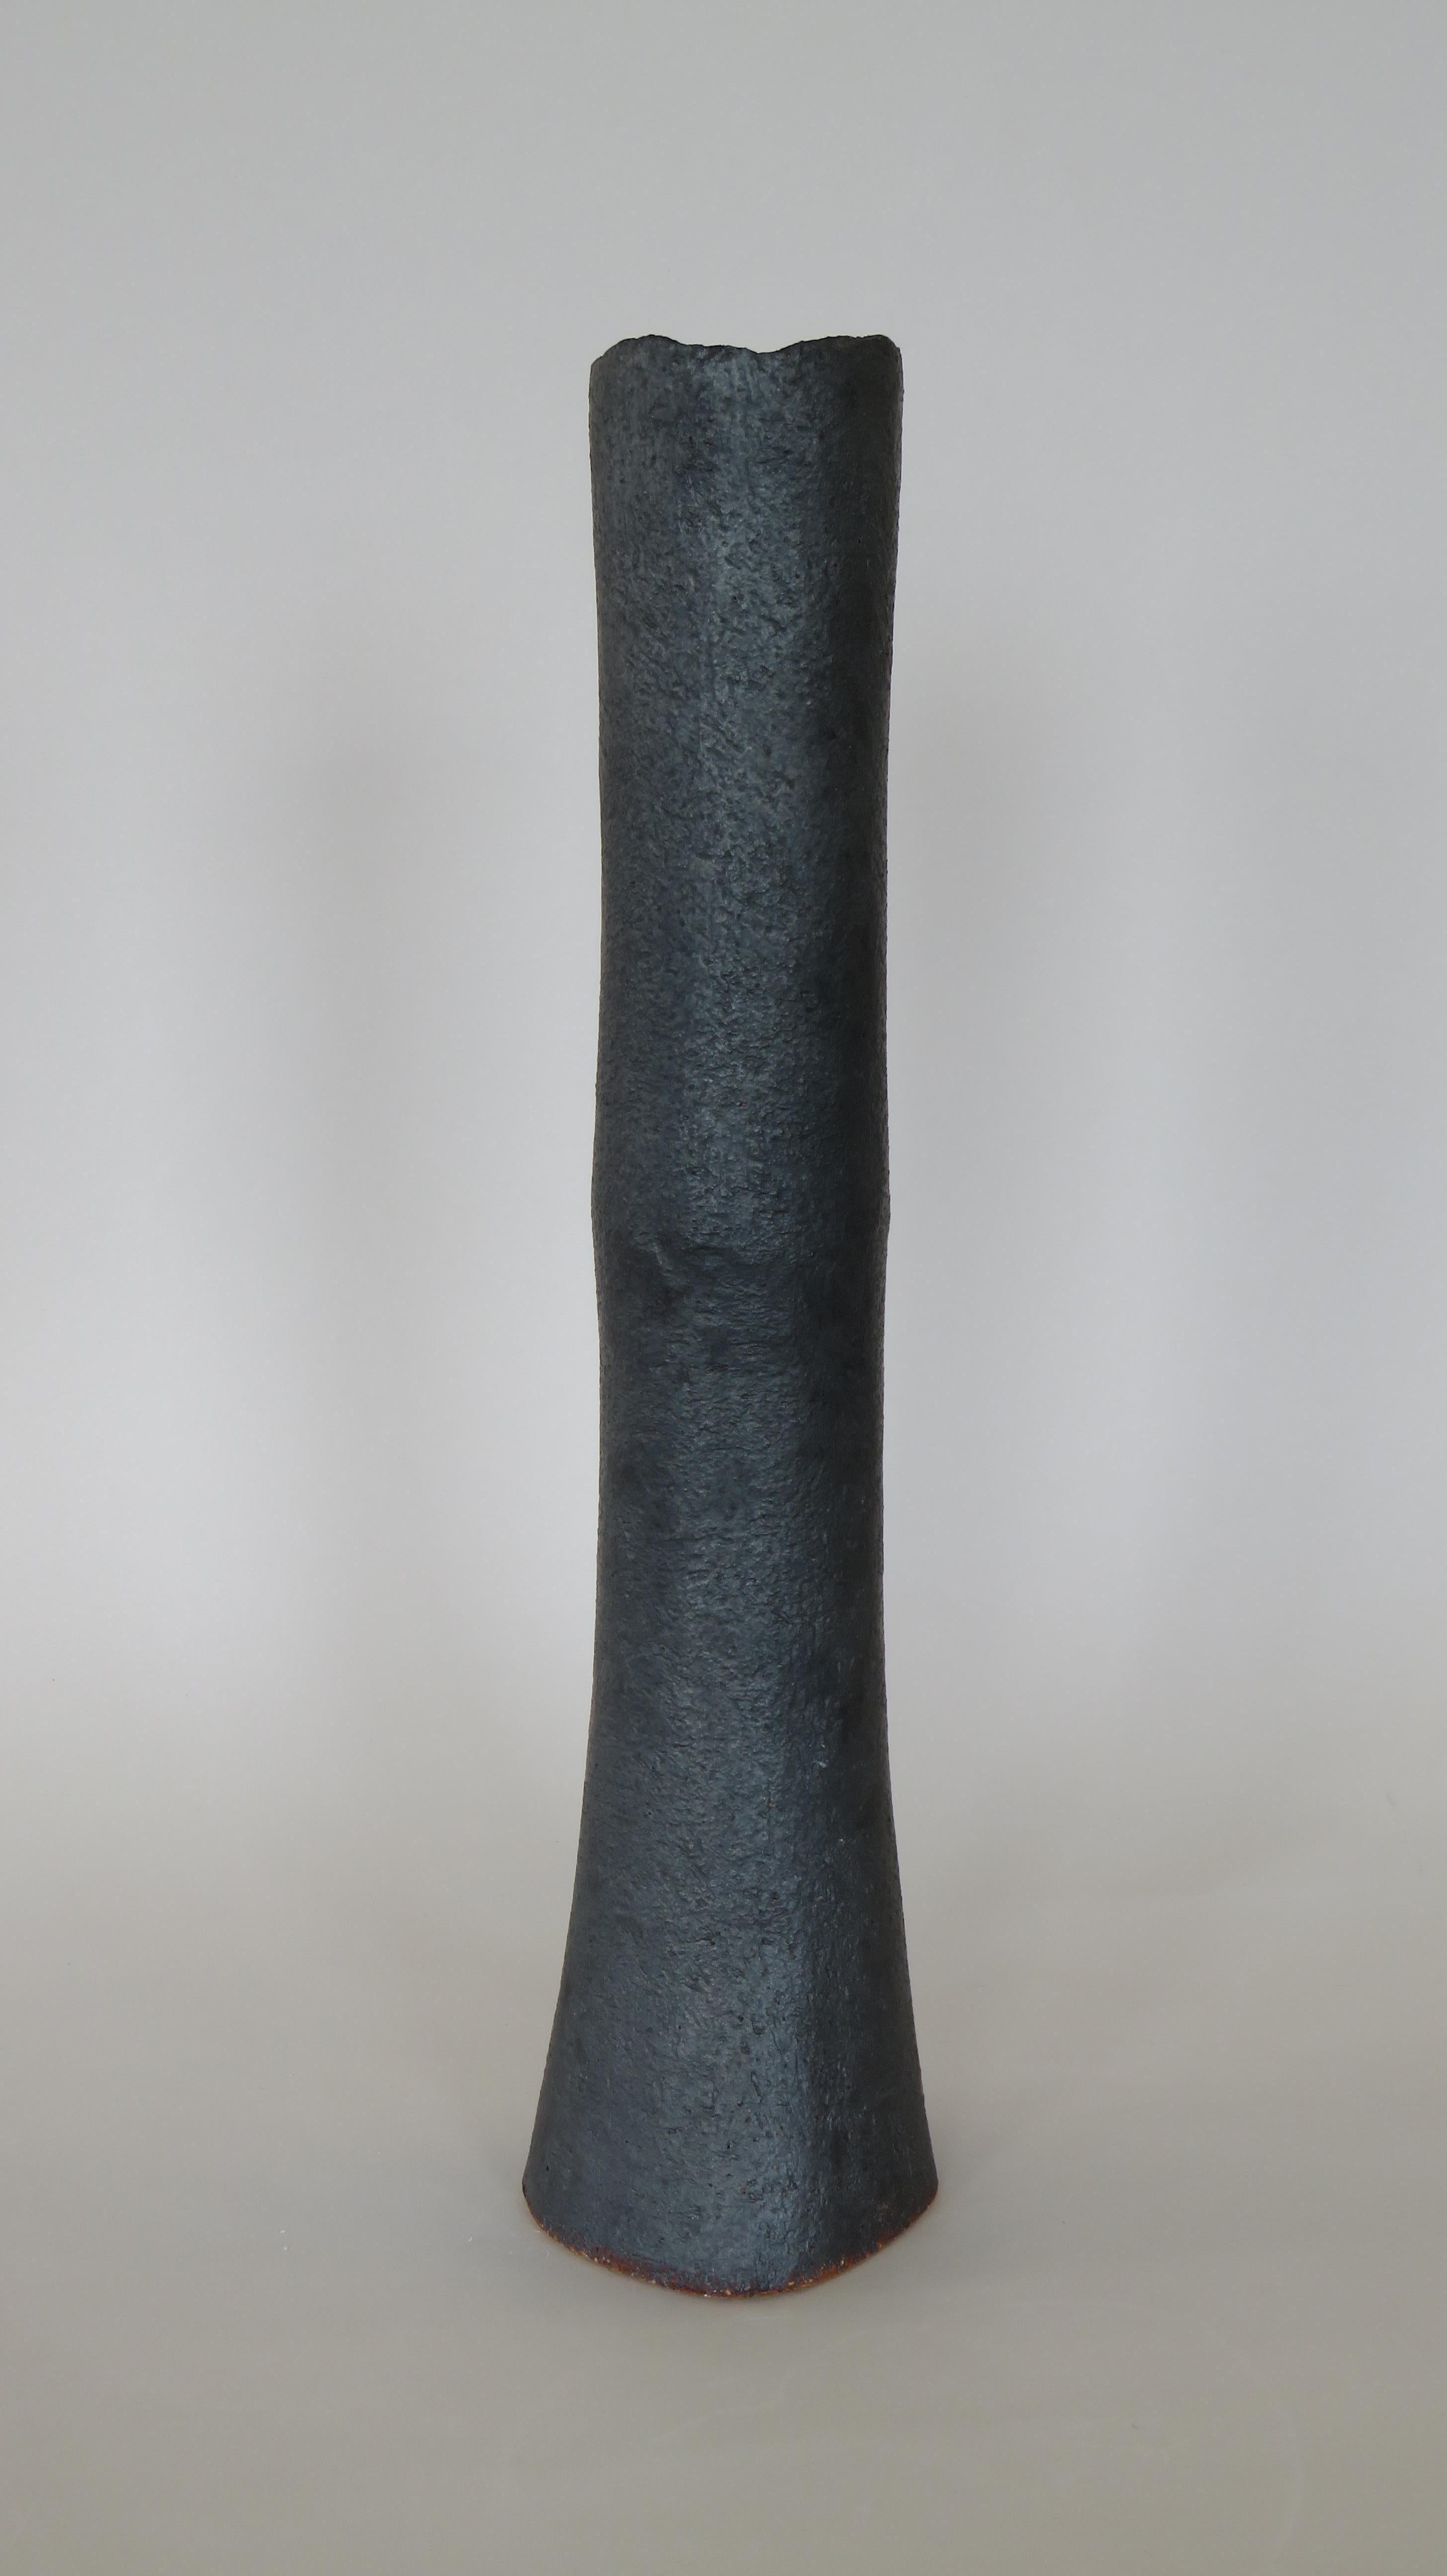 These tall vases in a metallic black glaze over stoneware are weighted on the bottom for tall floral arrangements or branches. Each surface is scraped to show the texture and tone of the clay, with varying bases or knobby edges. The top rims are